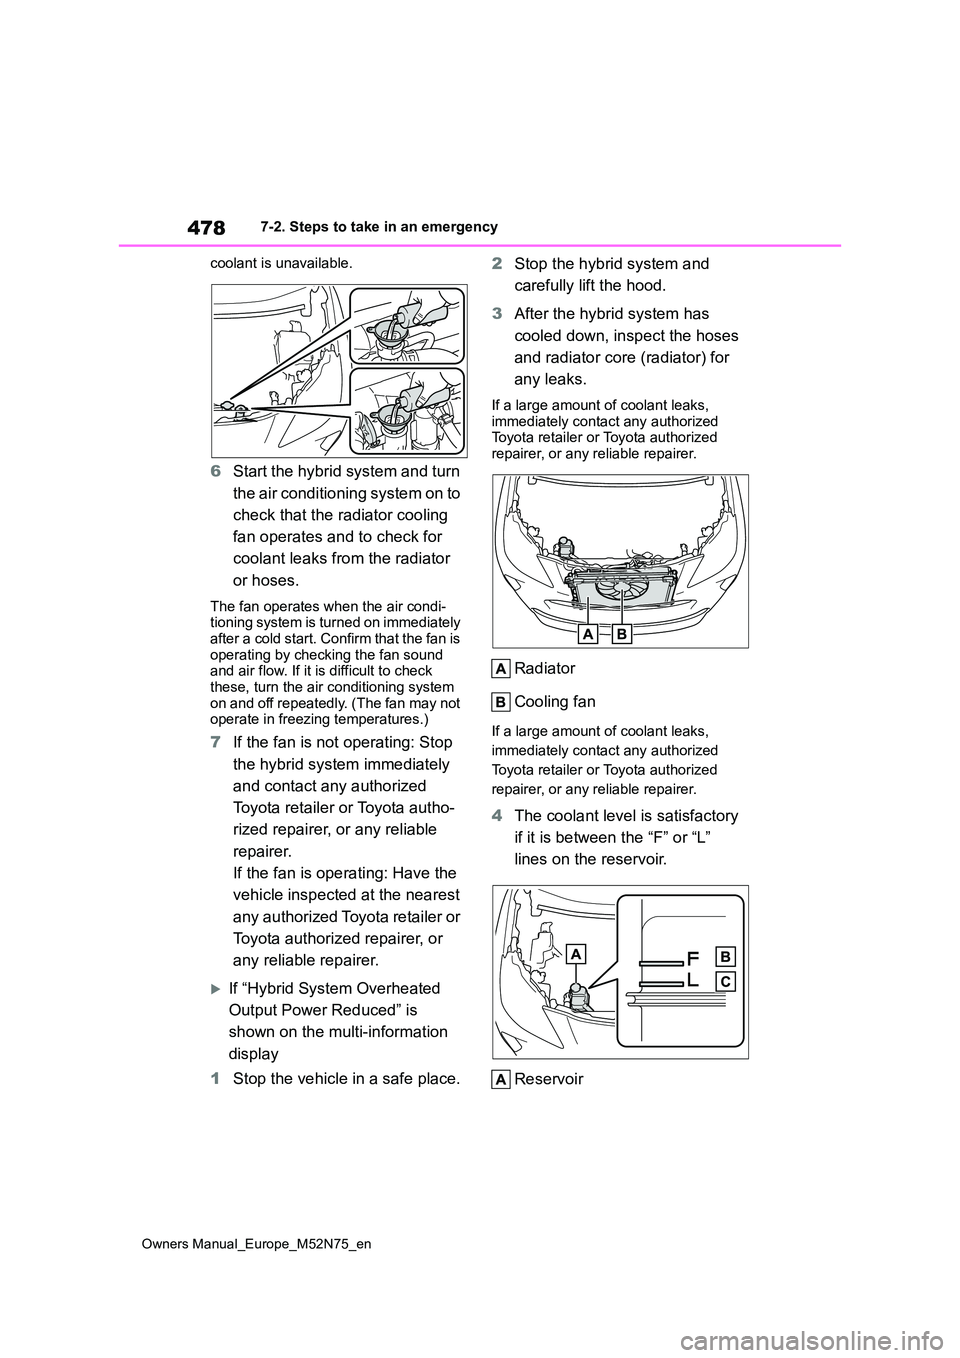 TOYOTA YARIS CROSS 2023  Owners Manual 478
Owners Manual_Europe_M52N75_en
7-2. Steps to take in an emergency 
coolant is unavailable.
6 Start the hybrid system and turn  
the air conditioning system on to  
check that the radiator cooling 